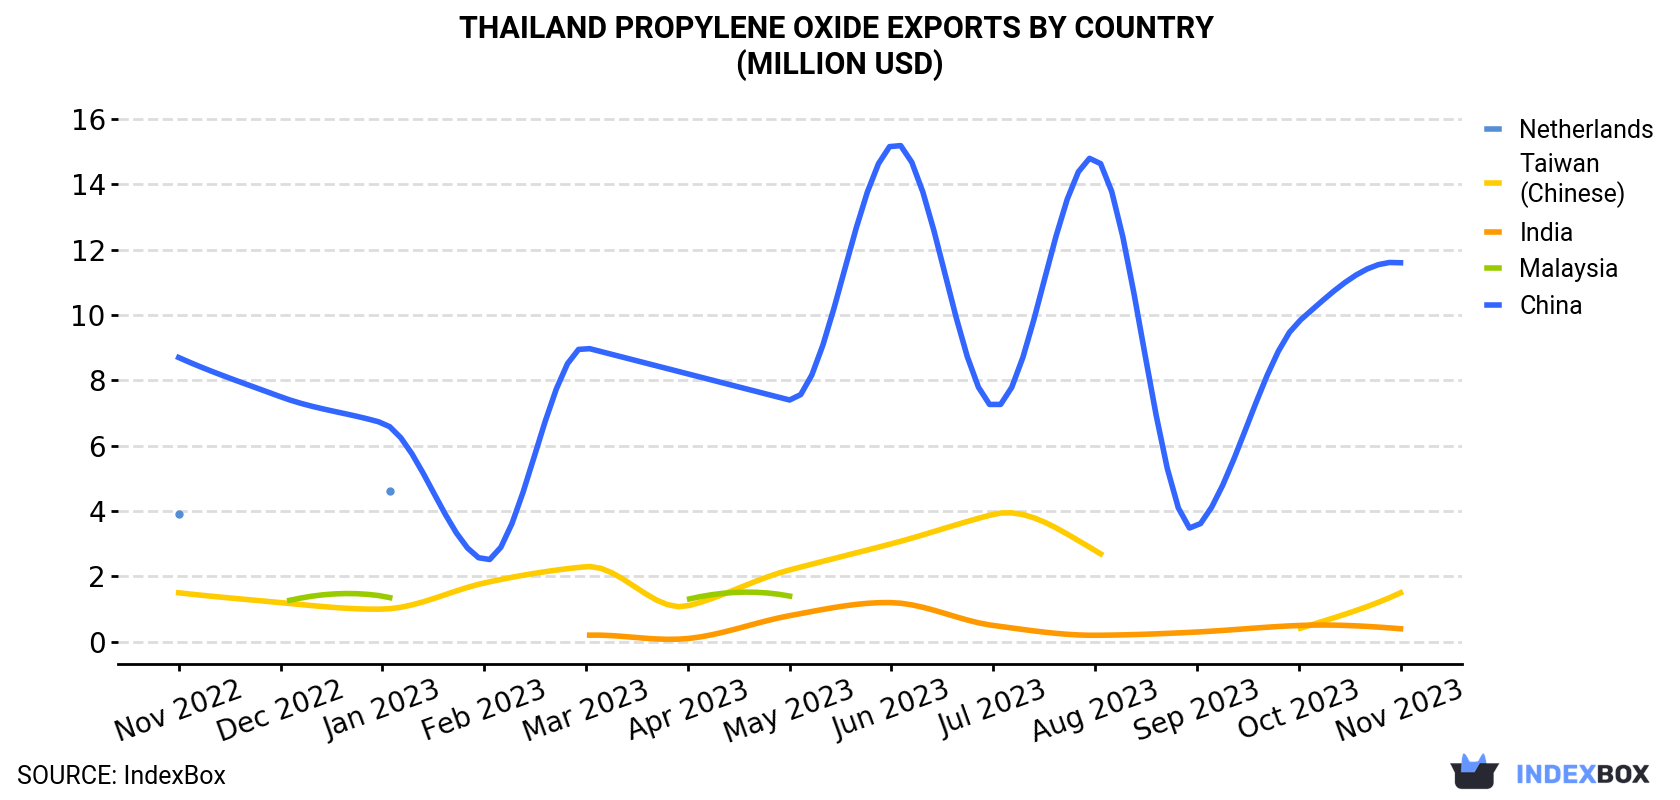 Thailand Propylene Oxide Exports By Country (Million USD)